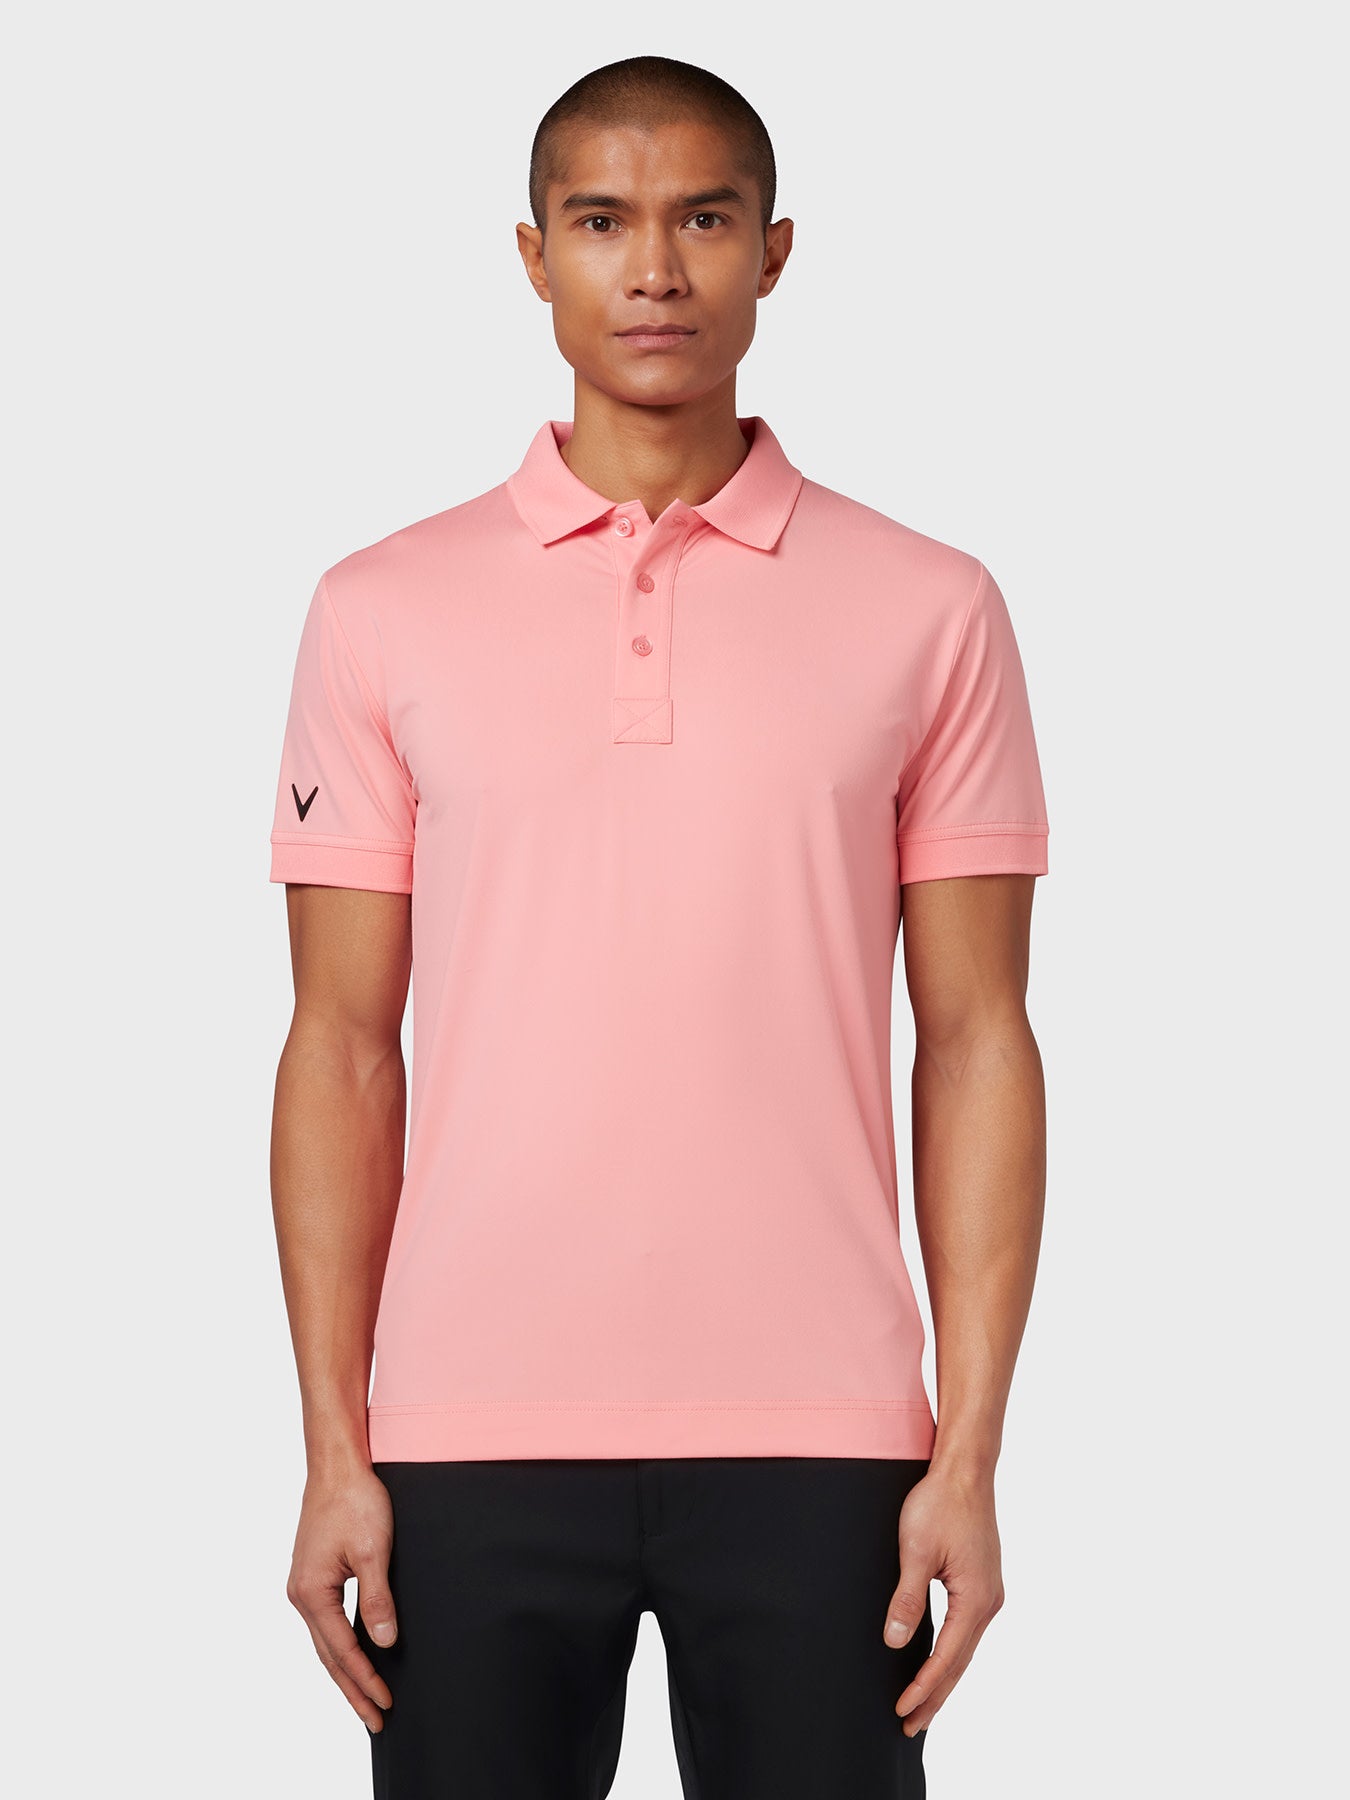 View X Series Solid Ribbed Polo In Geranium Pink Geranium Pink S information